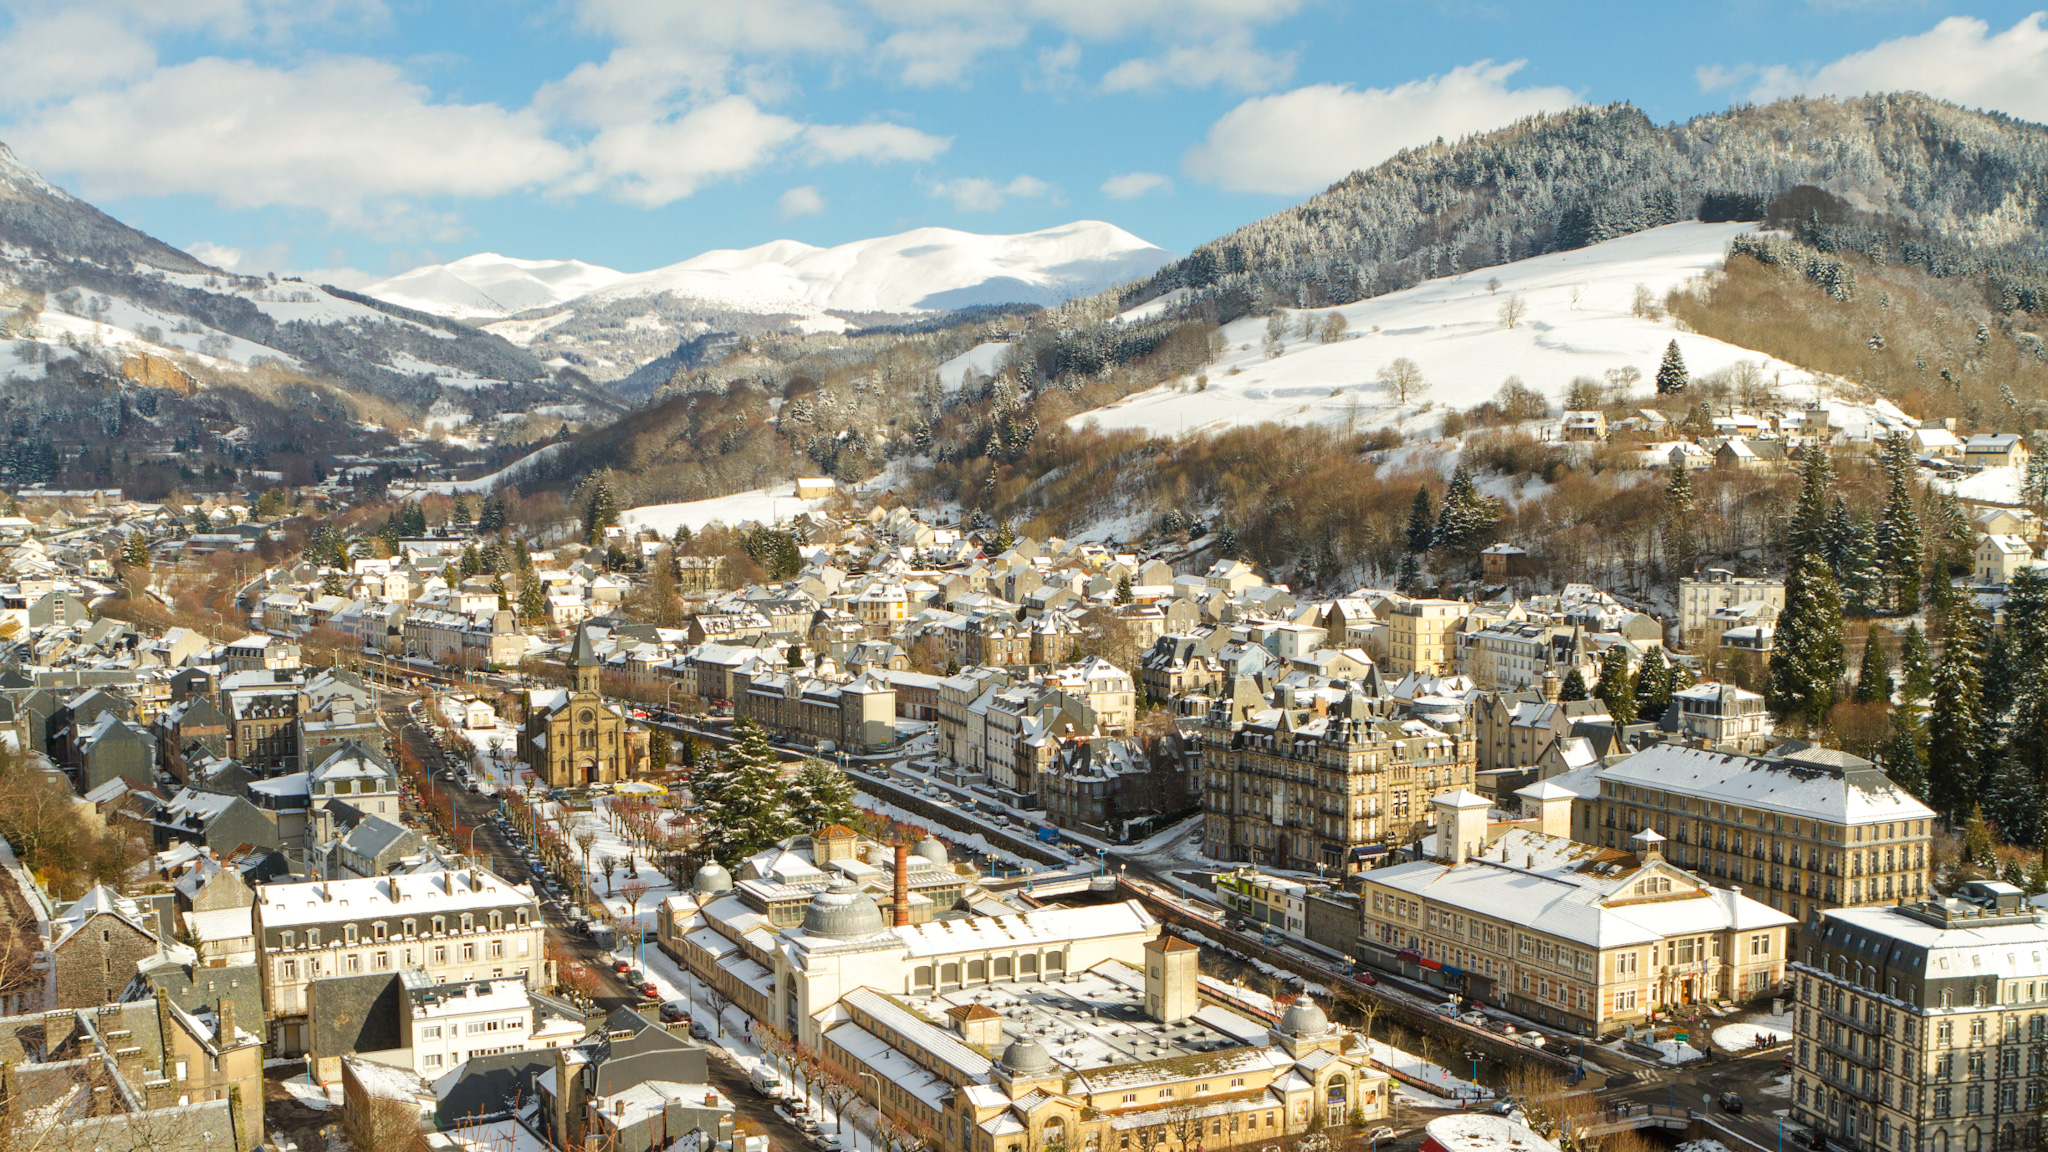 The snow-capped Monts Dore dominating the town of La Bourboule